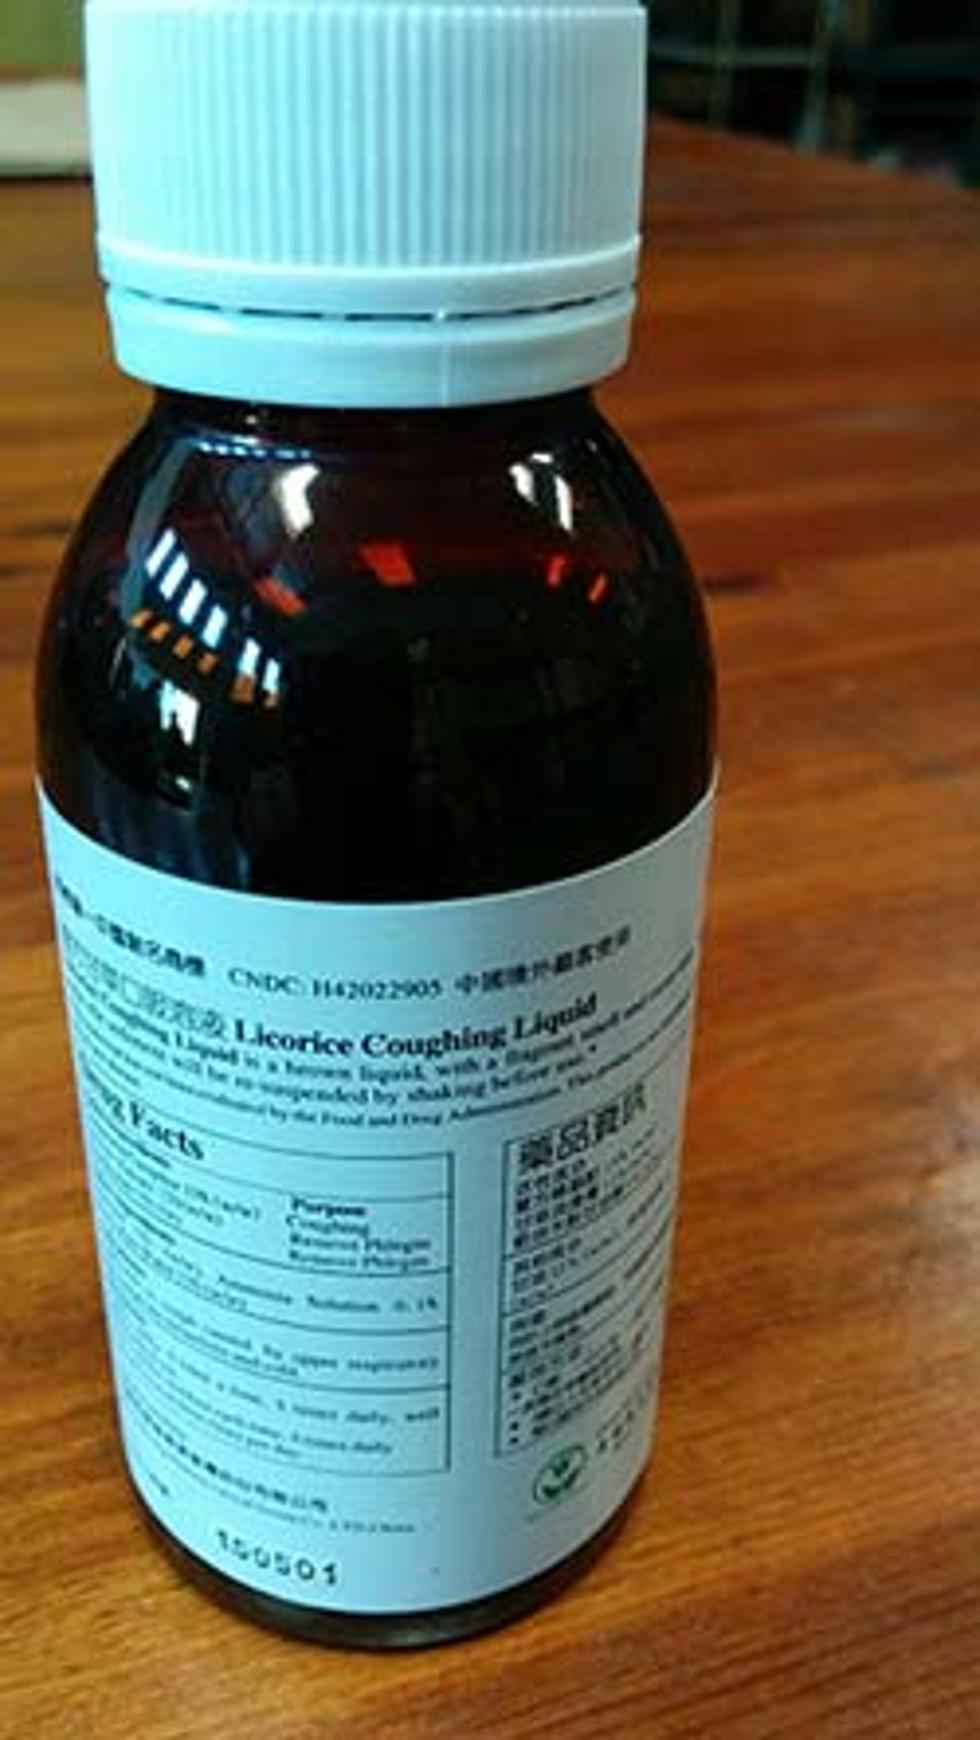 Cough Syrup Recalled Because it Contains Morphine